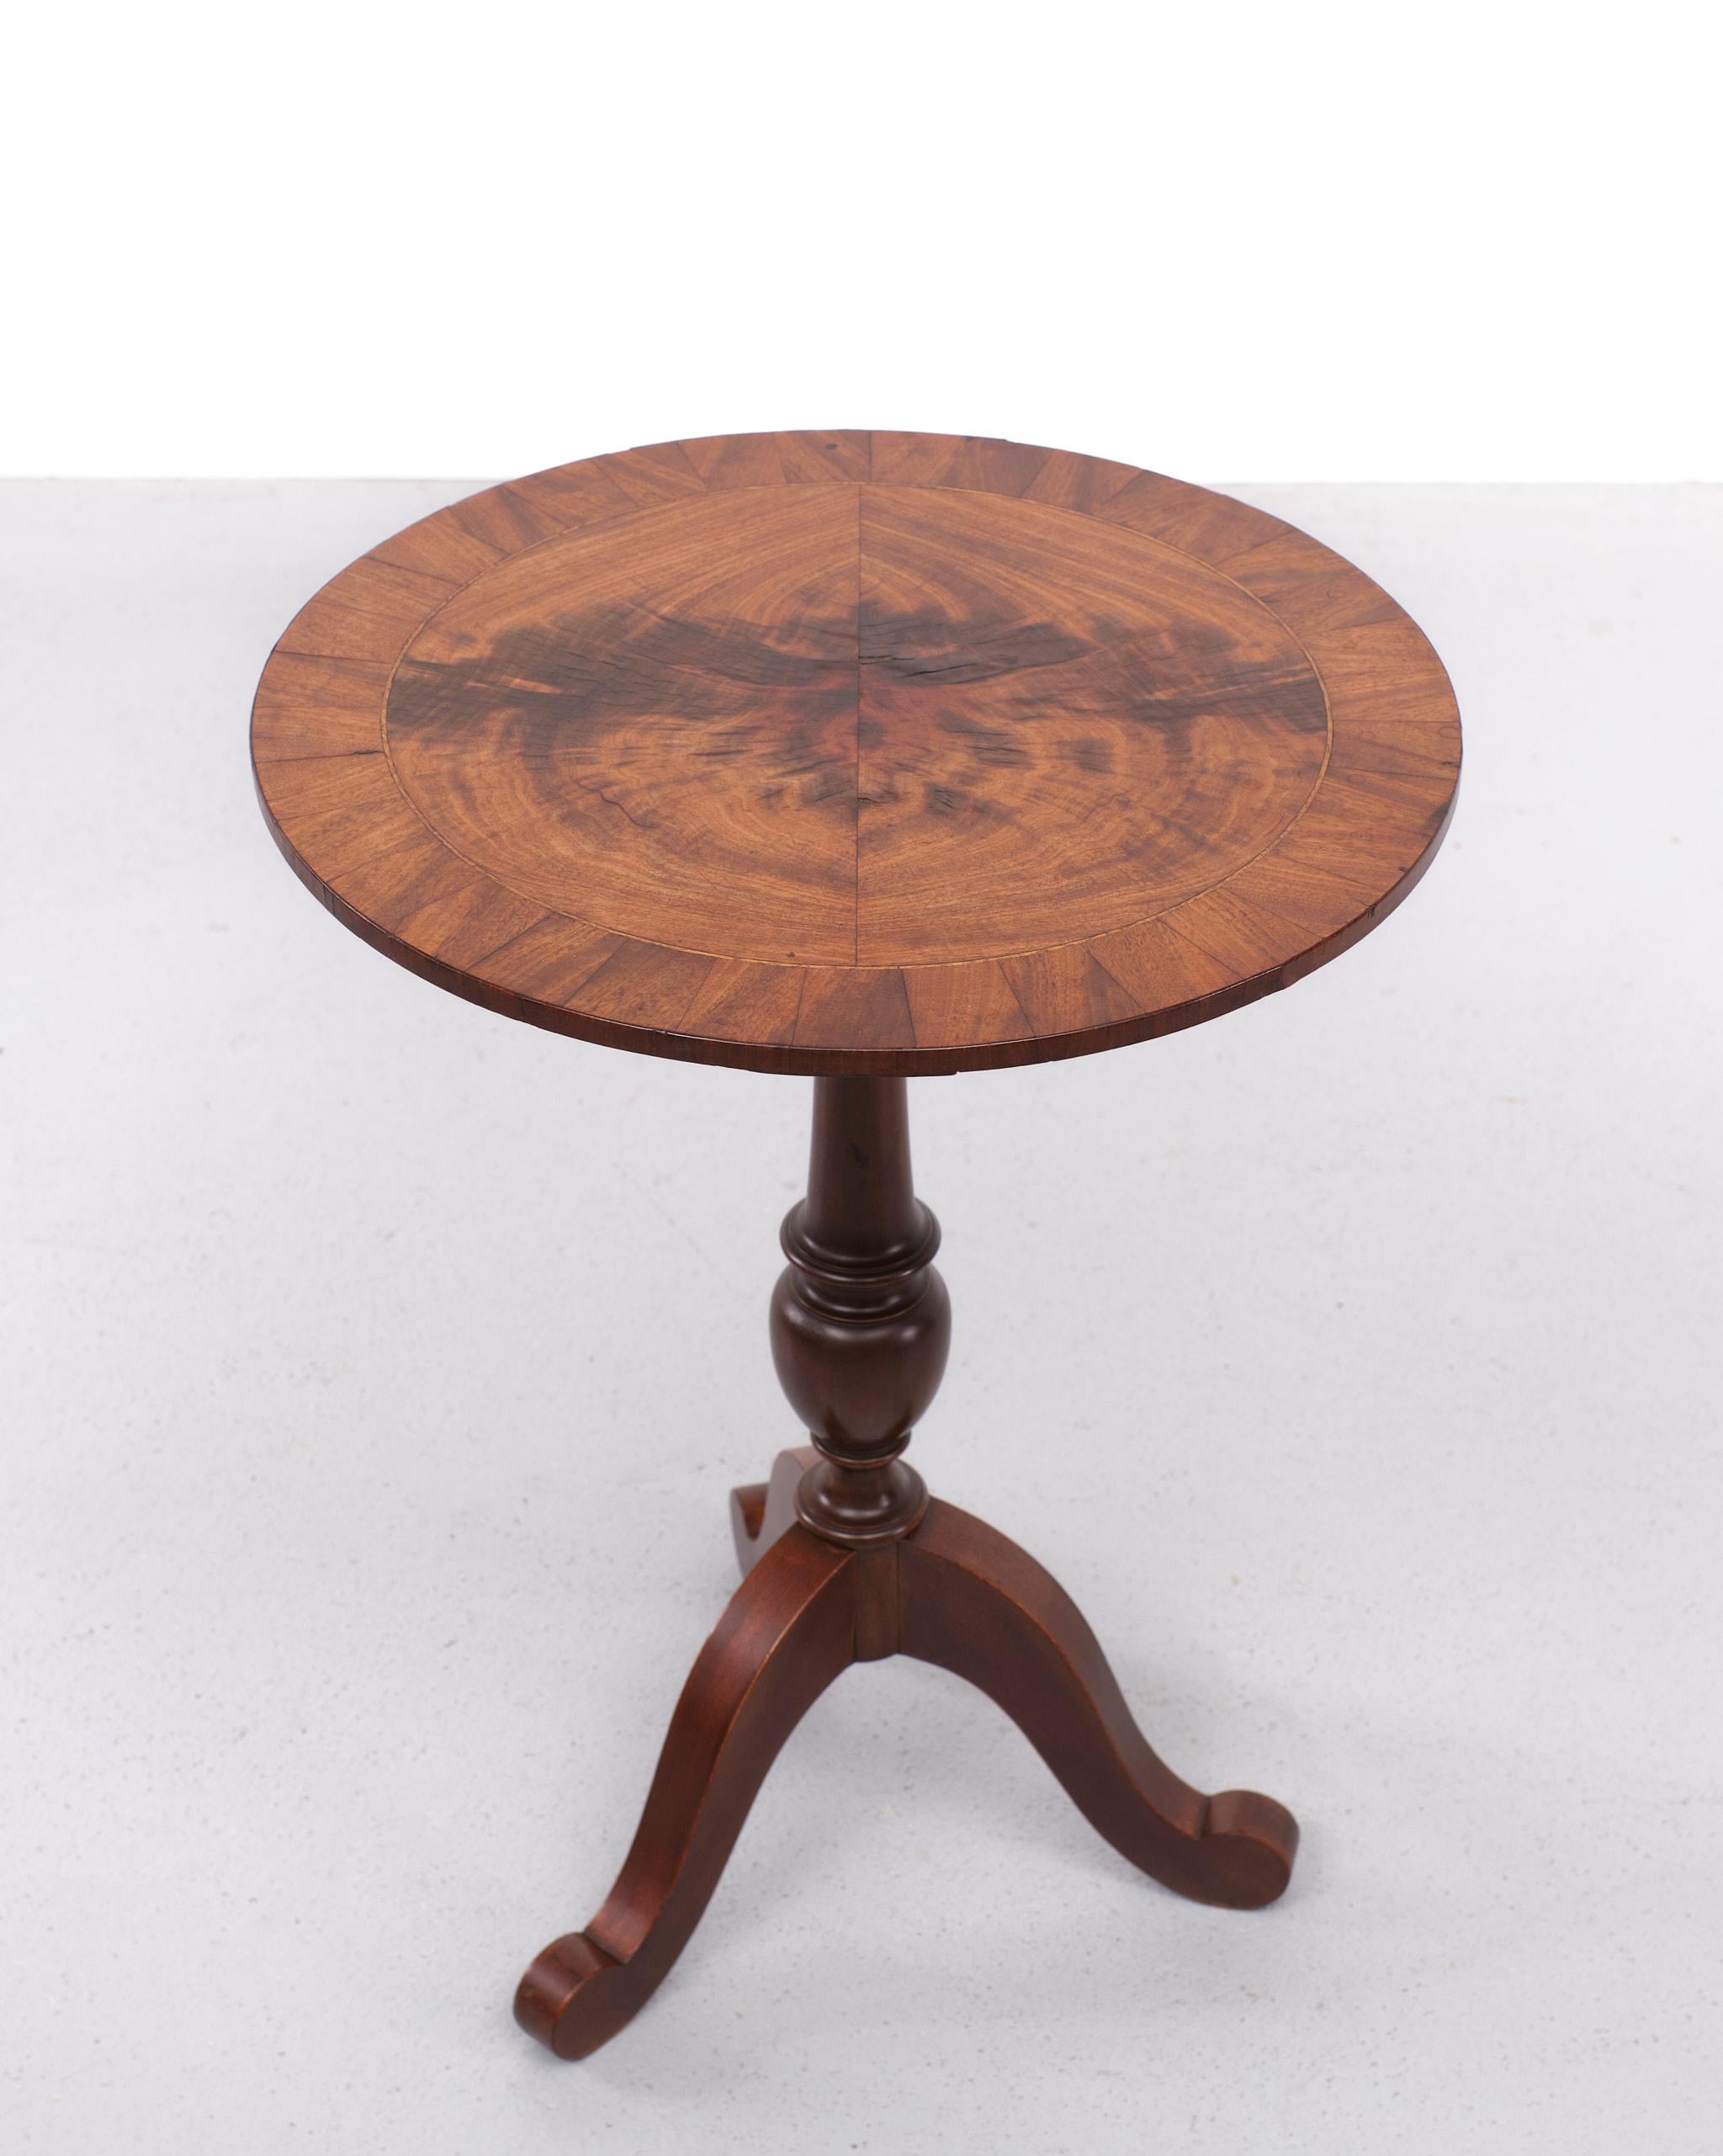 Victorian Antique Burl Wood Carafe Table 1880s England  For Sale